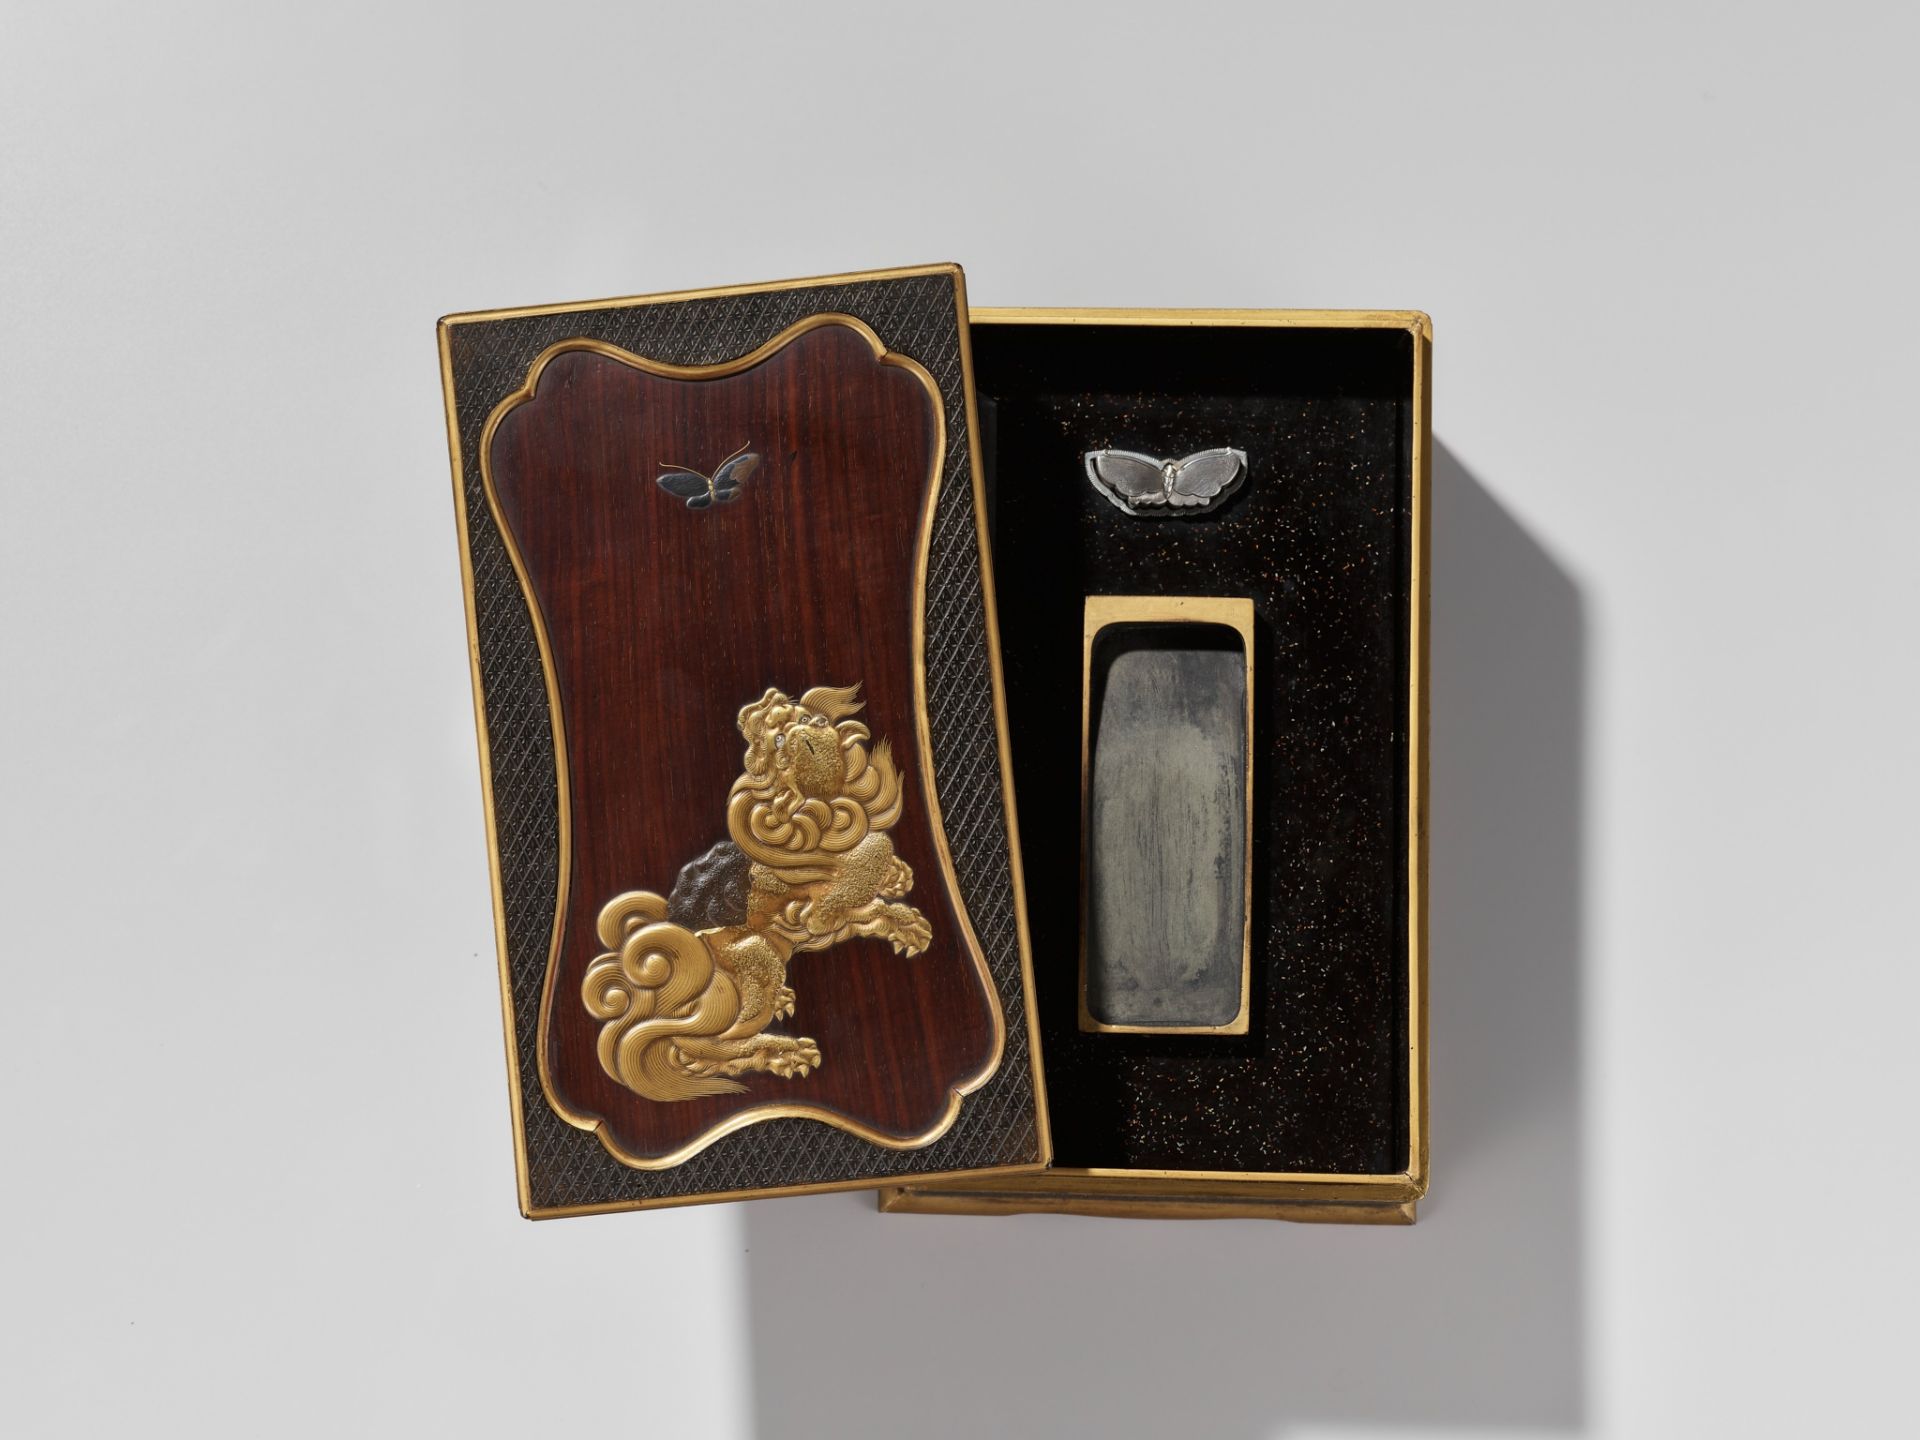 A RARE LACQUERED WOOD SUZURIBAKO (WRITING BOX) DEPICTING A SHISHI AND BUTTERFLY - Image 7 of 9